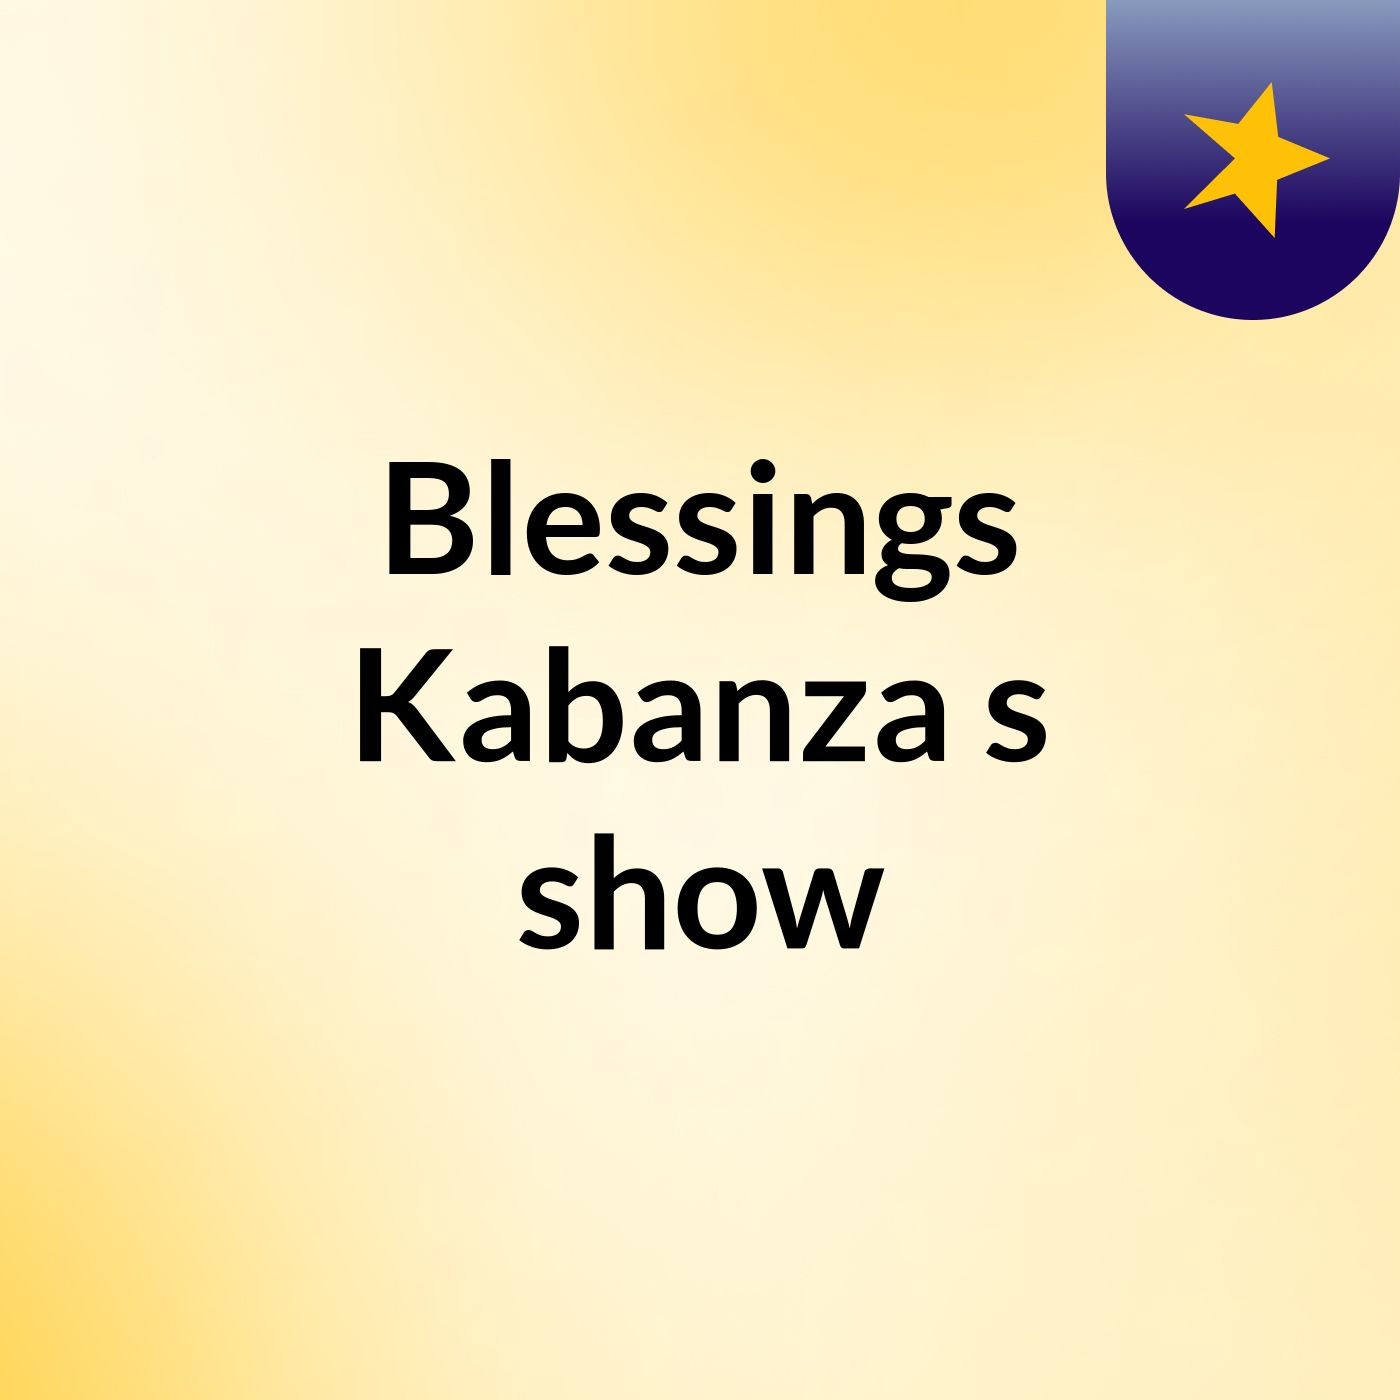 Episode 6 - Blessings Kabanza's show